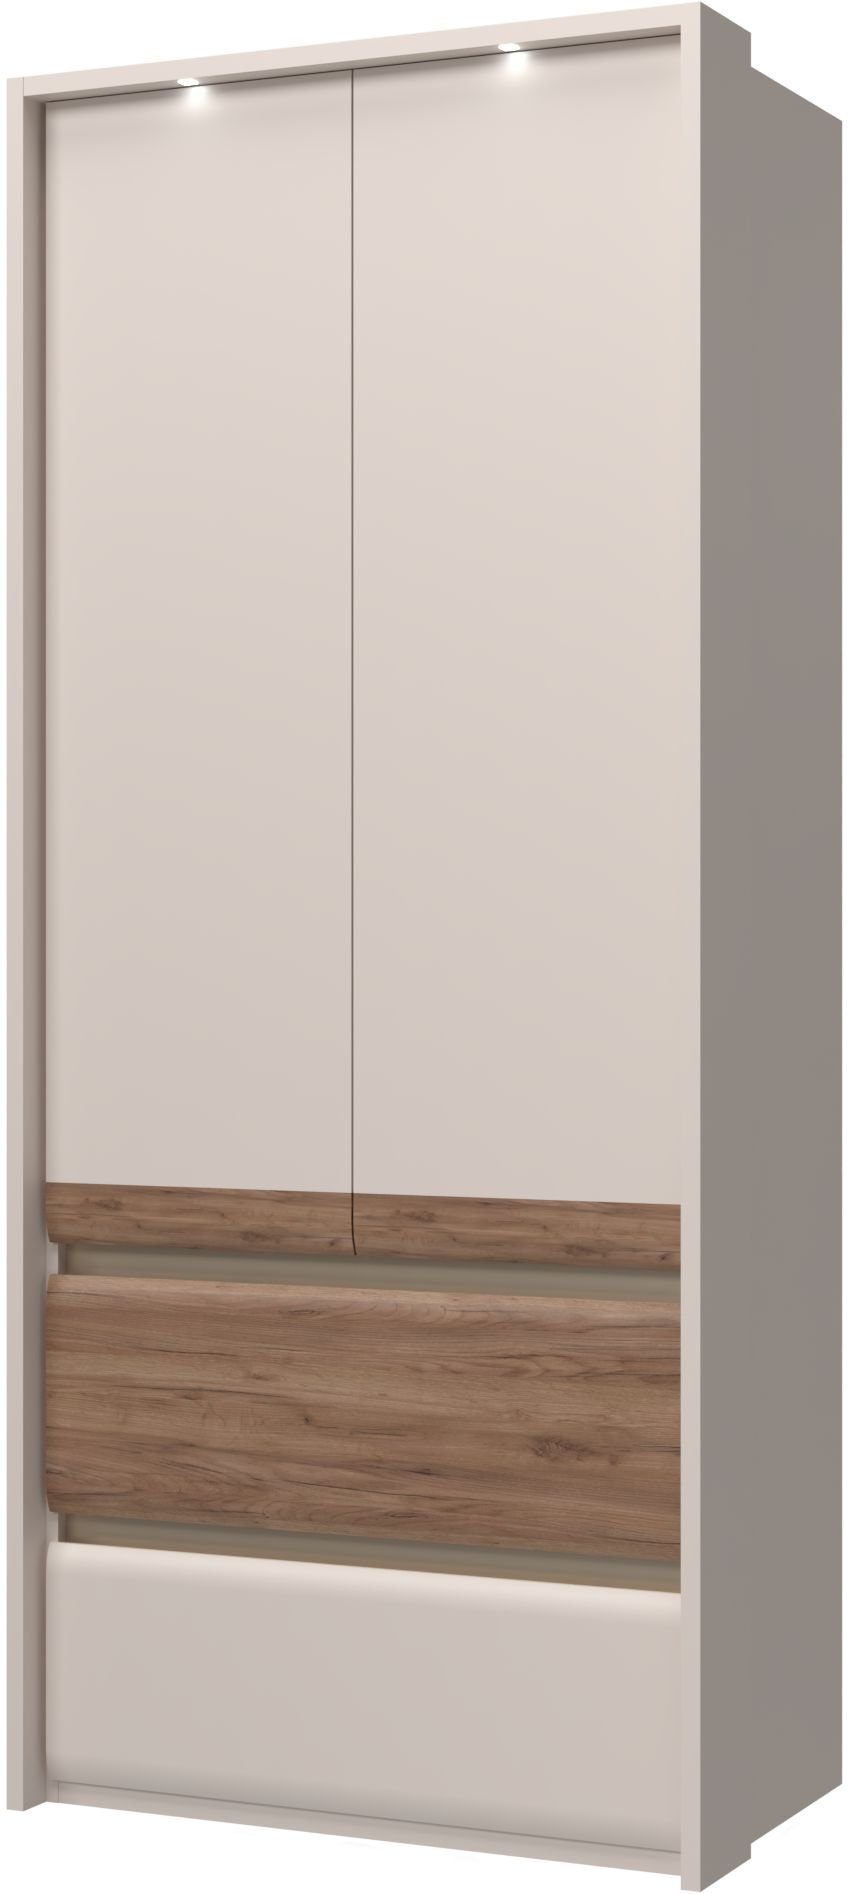 Places of Invictus mit Soft-Close Style Beleuchtung, LED Kleiderschrank UV lackiert, Funktion